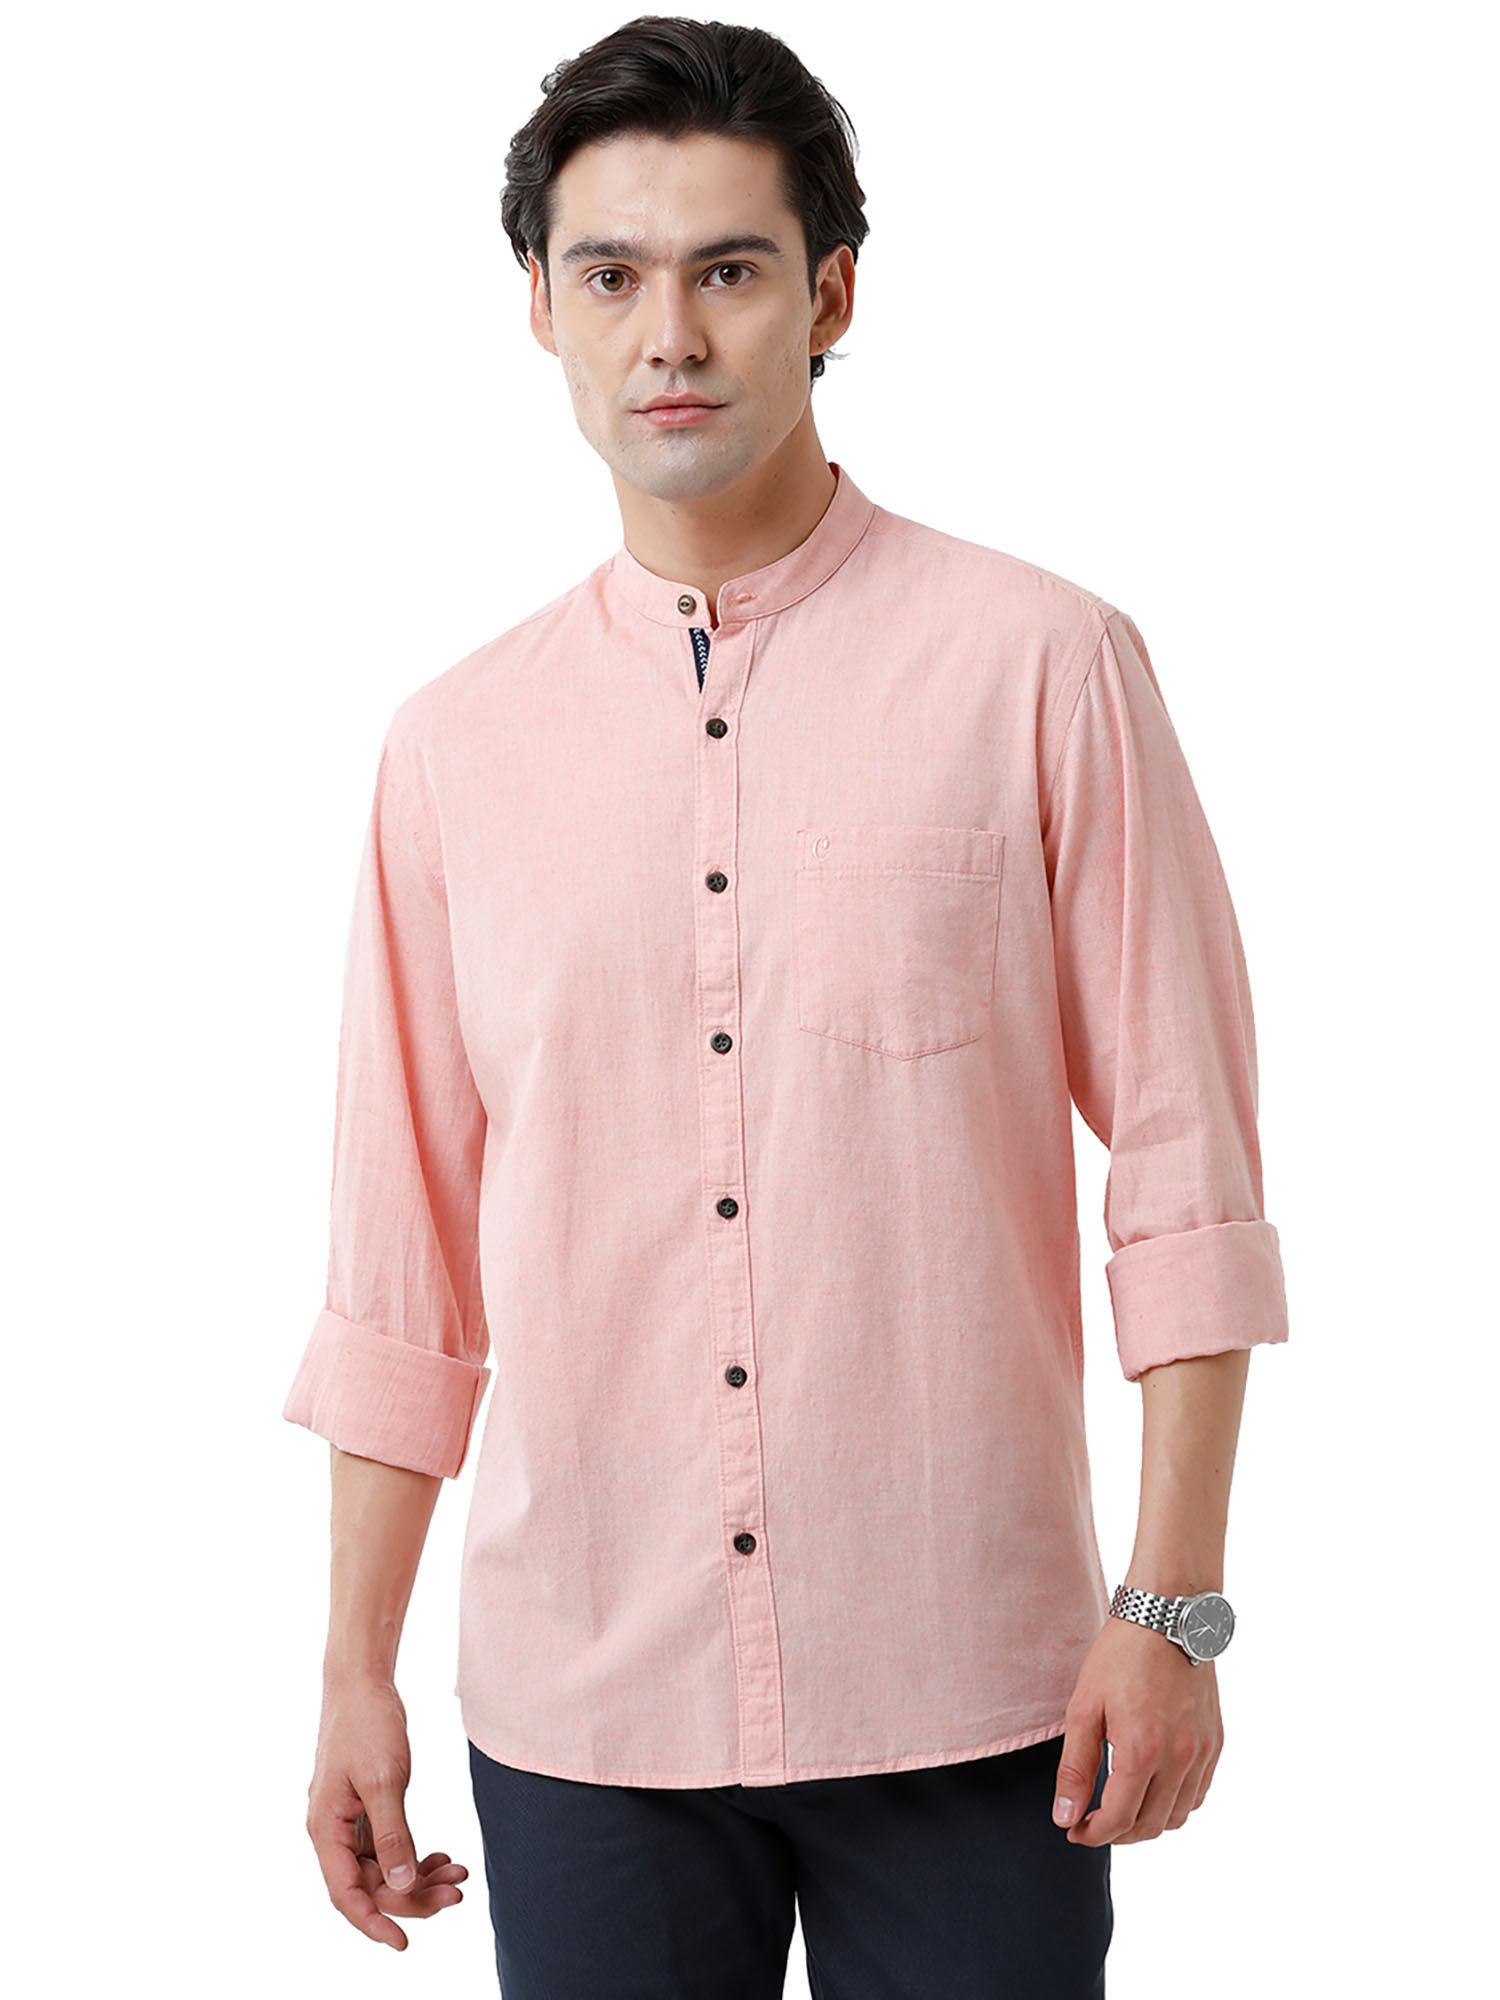 men's-cotton-linen-red-chambray-slim-fit-full-sleeve-casual-shirt